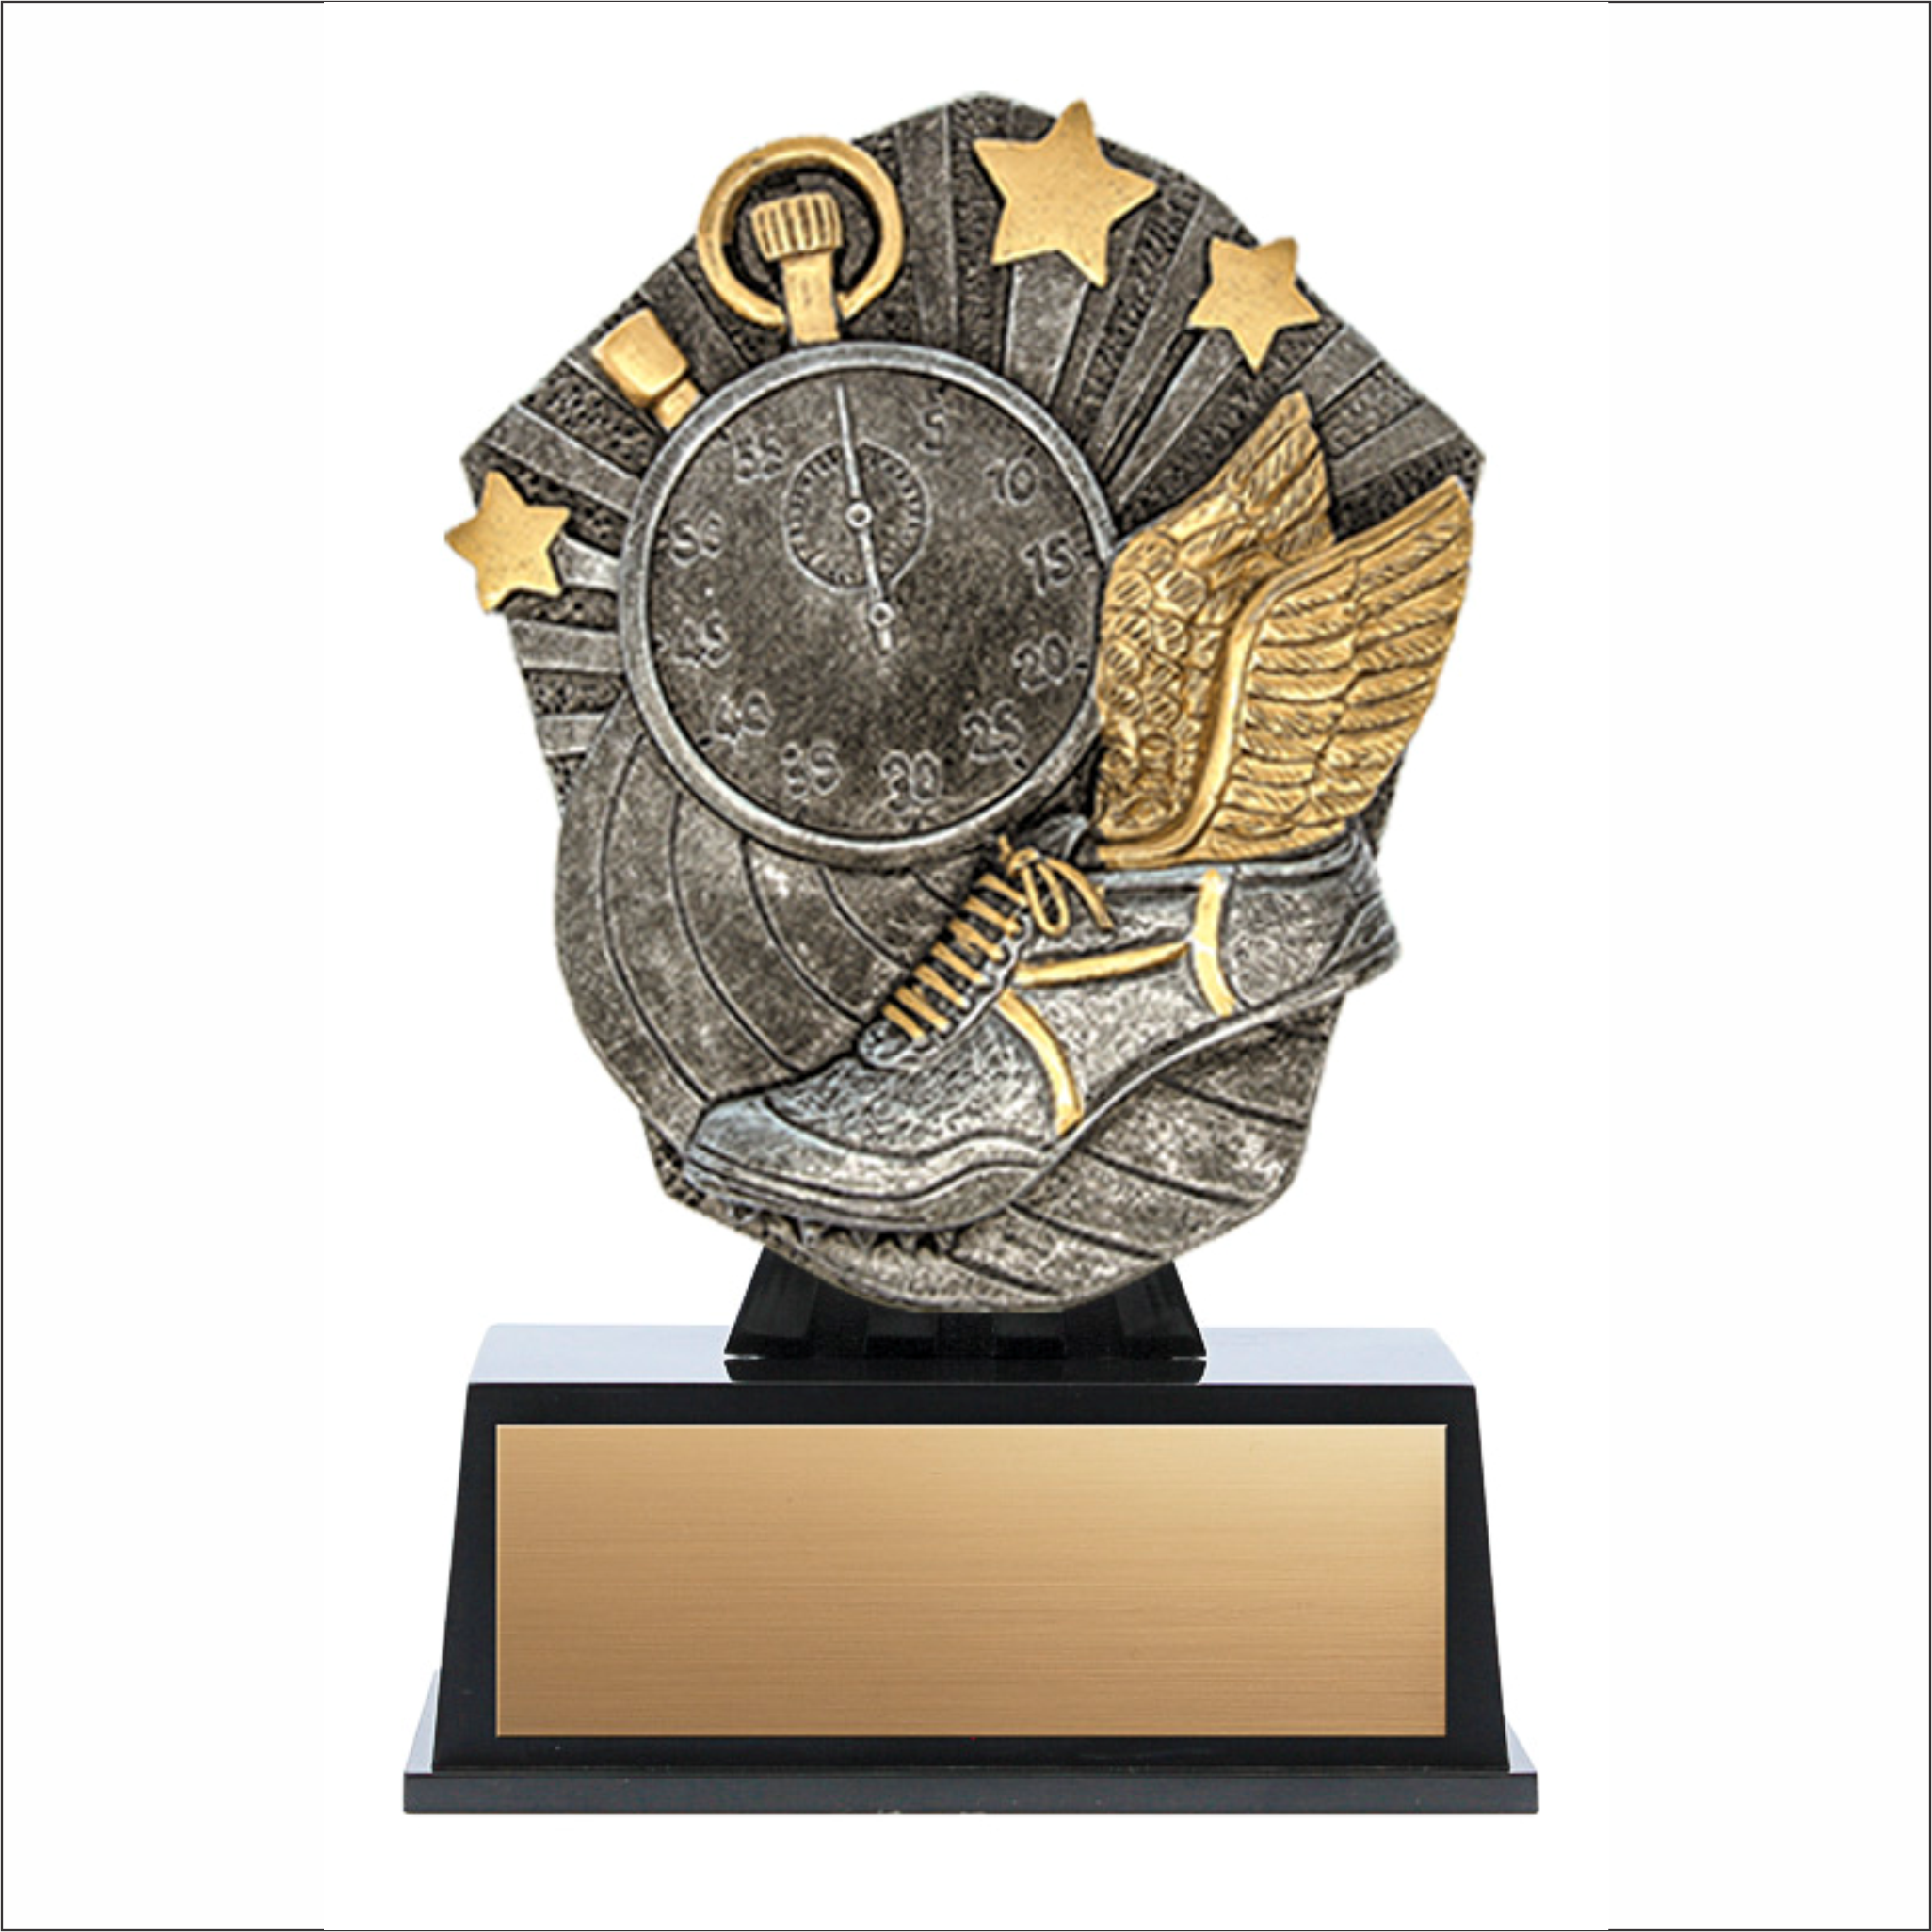 Track & Field trophy - Cosmos series